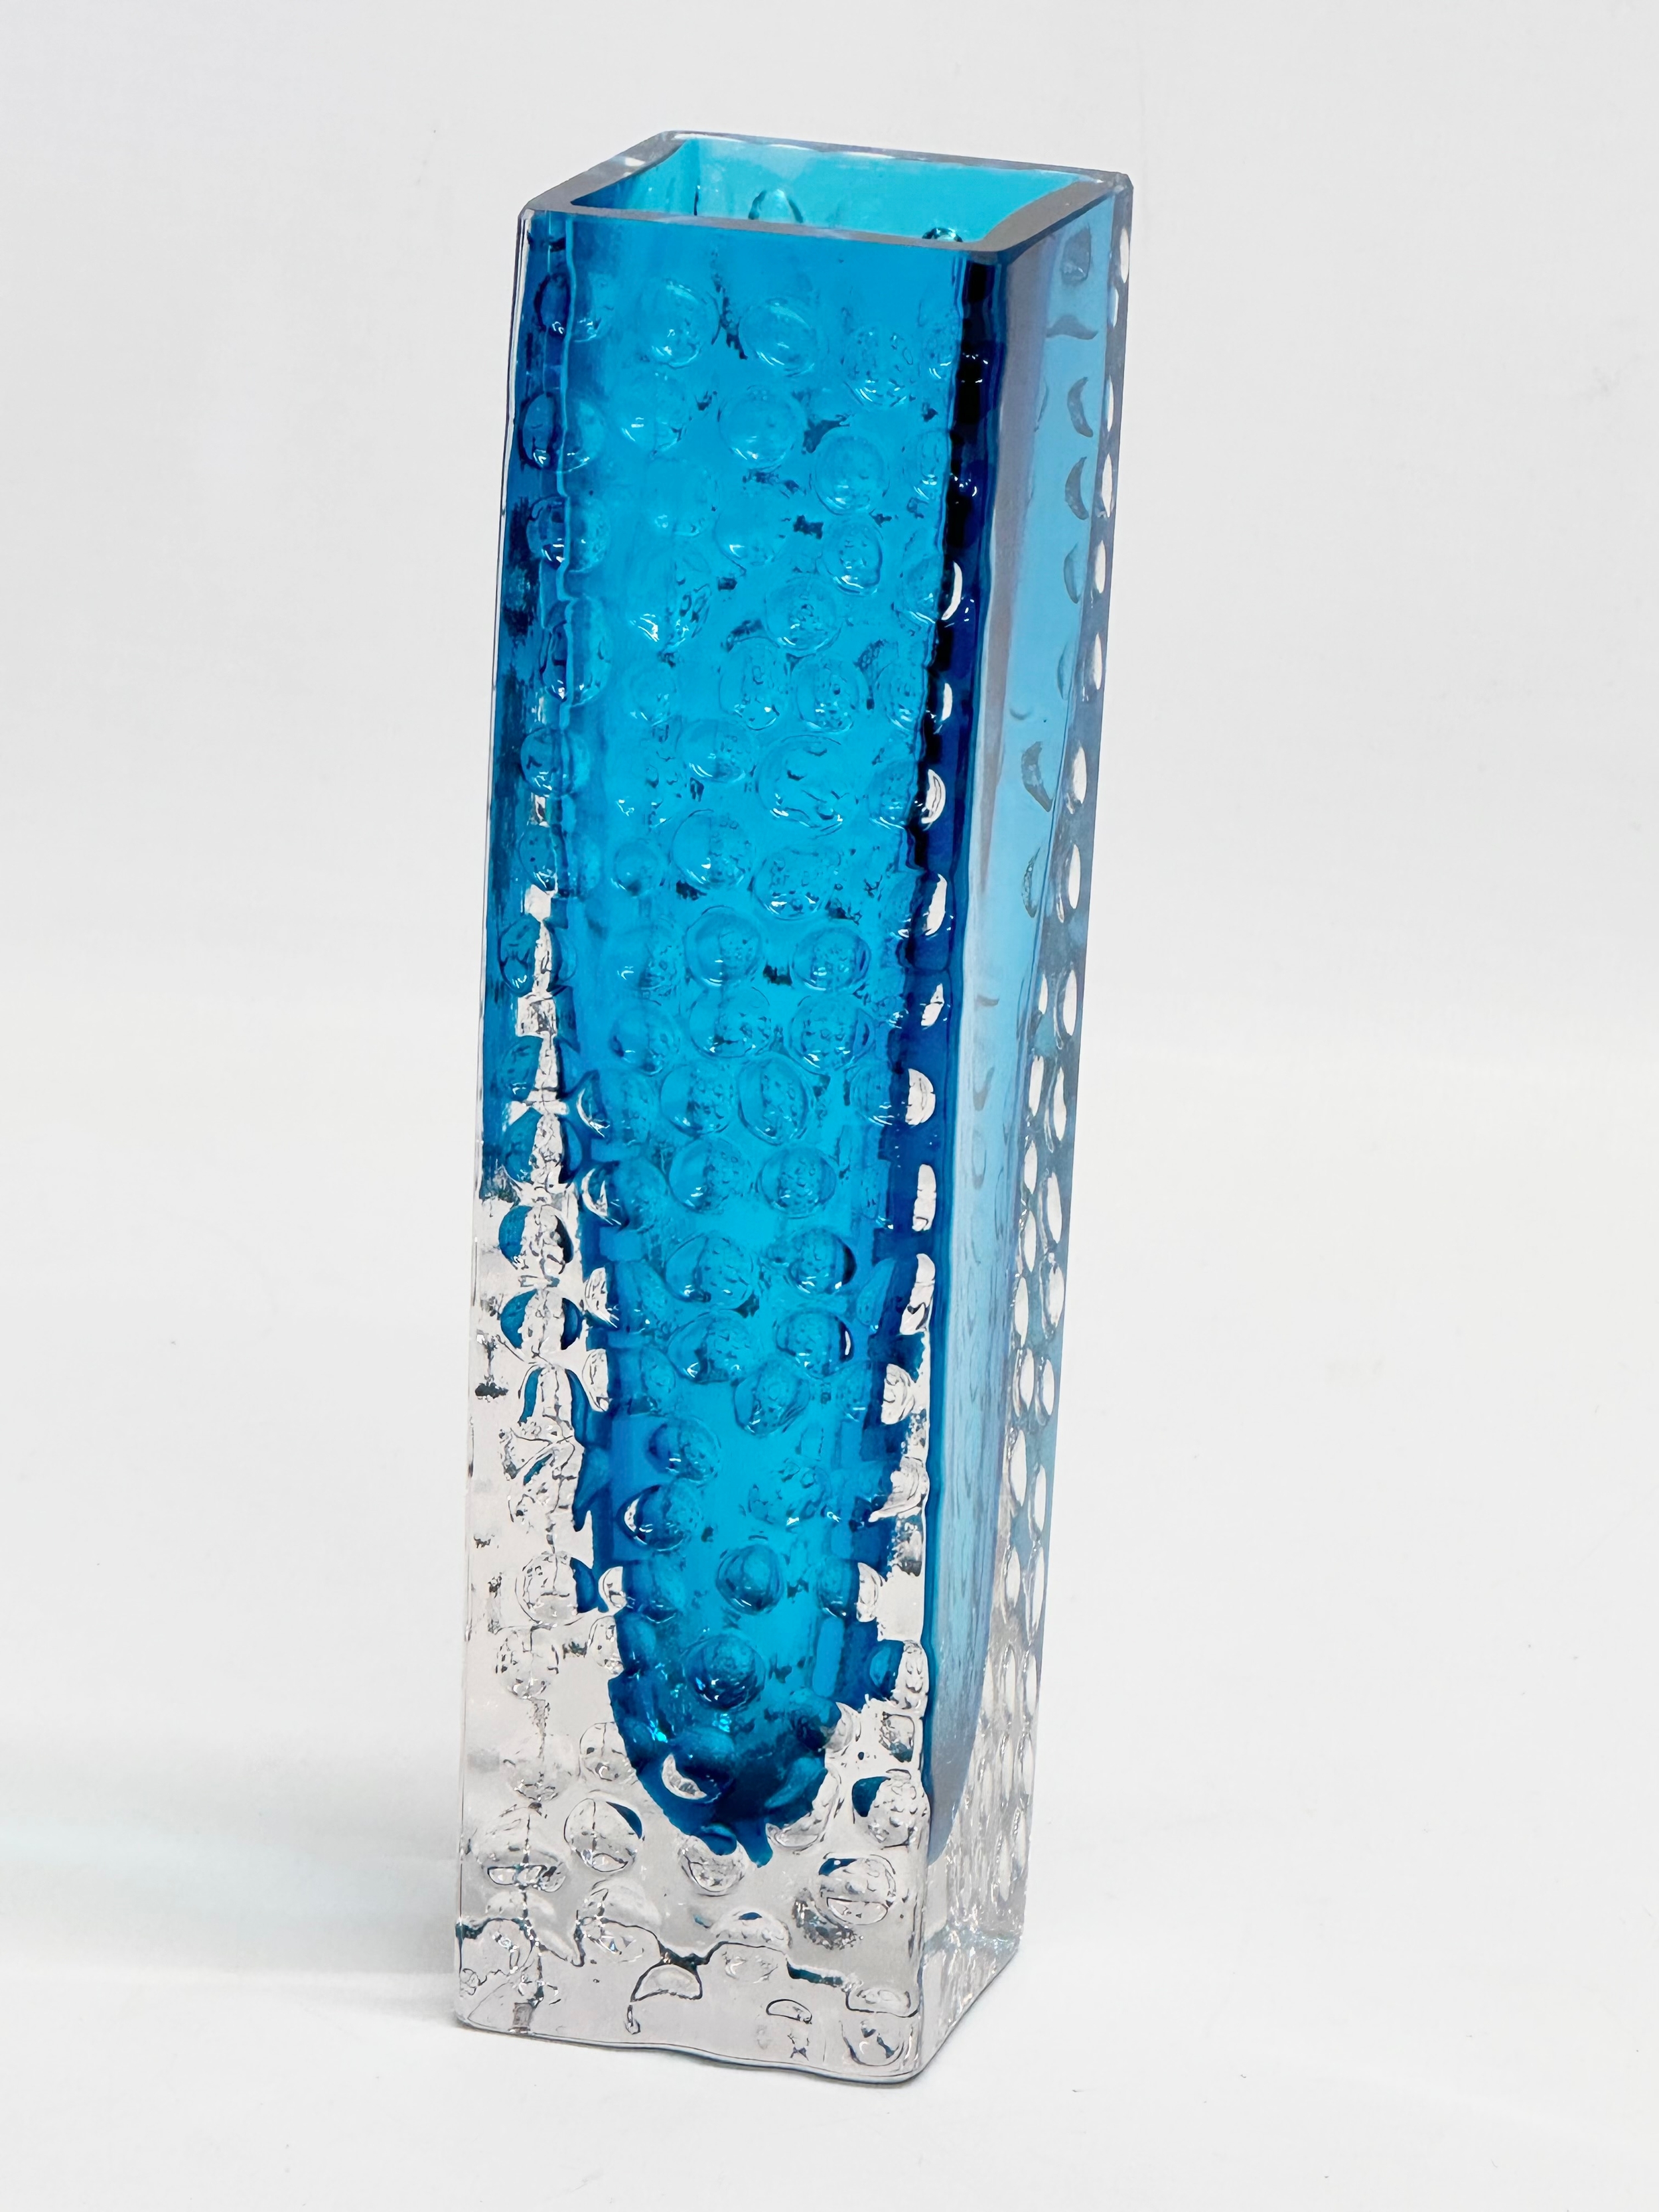 A Kingfisher Blue ‘Nailhead’ vase designed by Geoffrey Baxter for Whitefriars. 4.5x45.5x17cm.